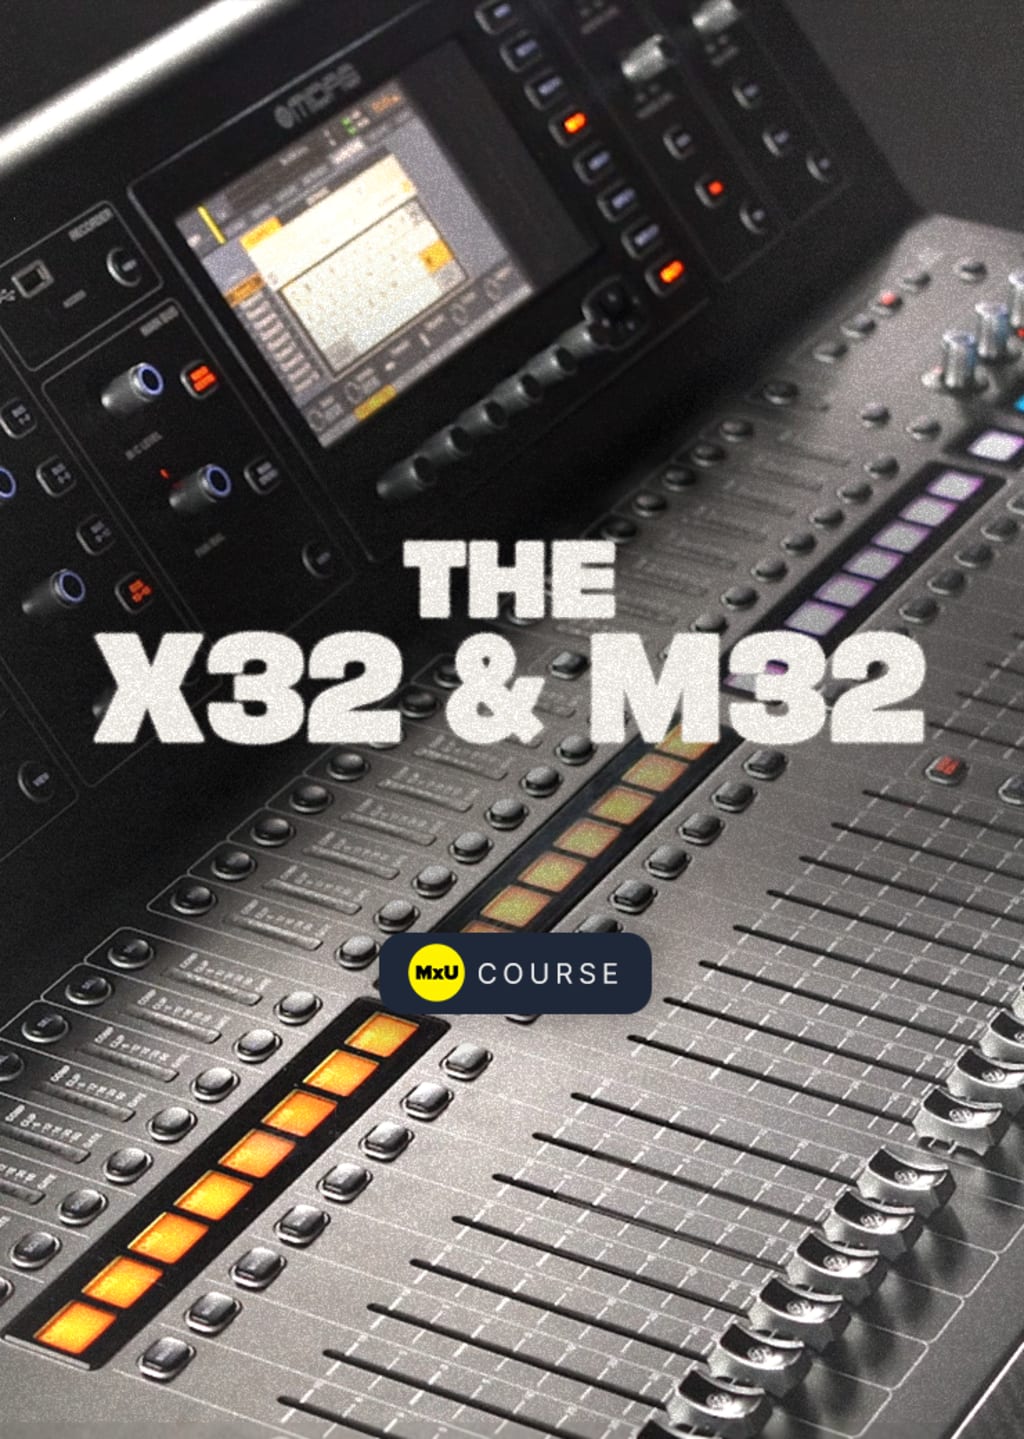 The X32 and M32